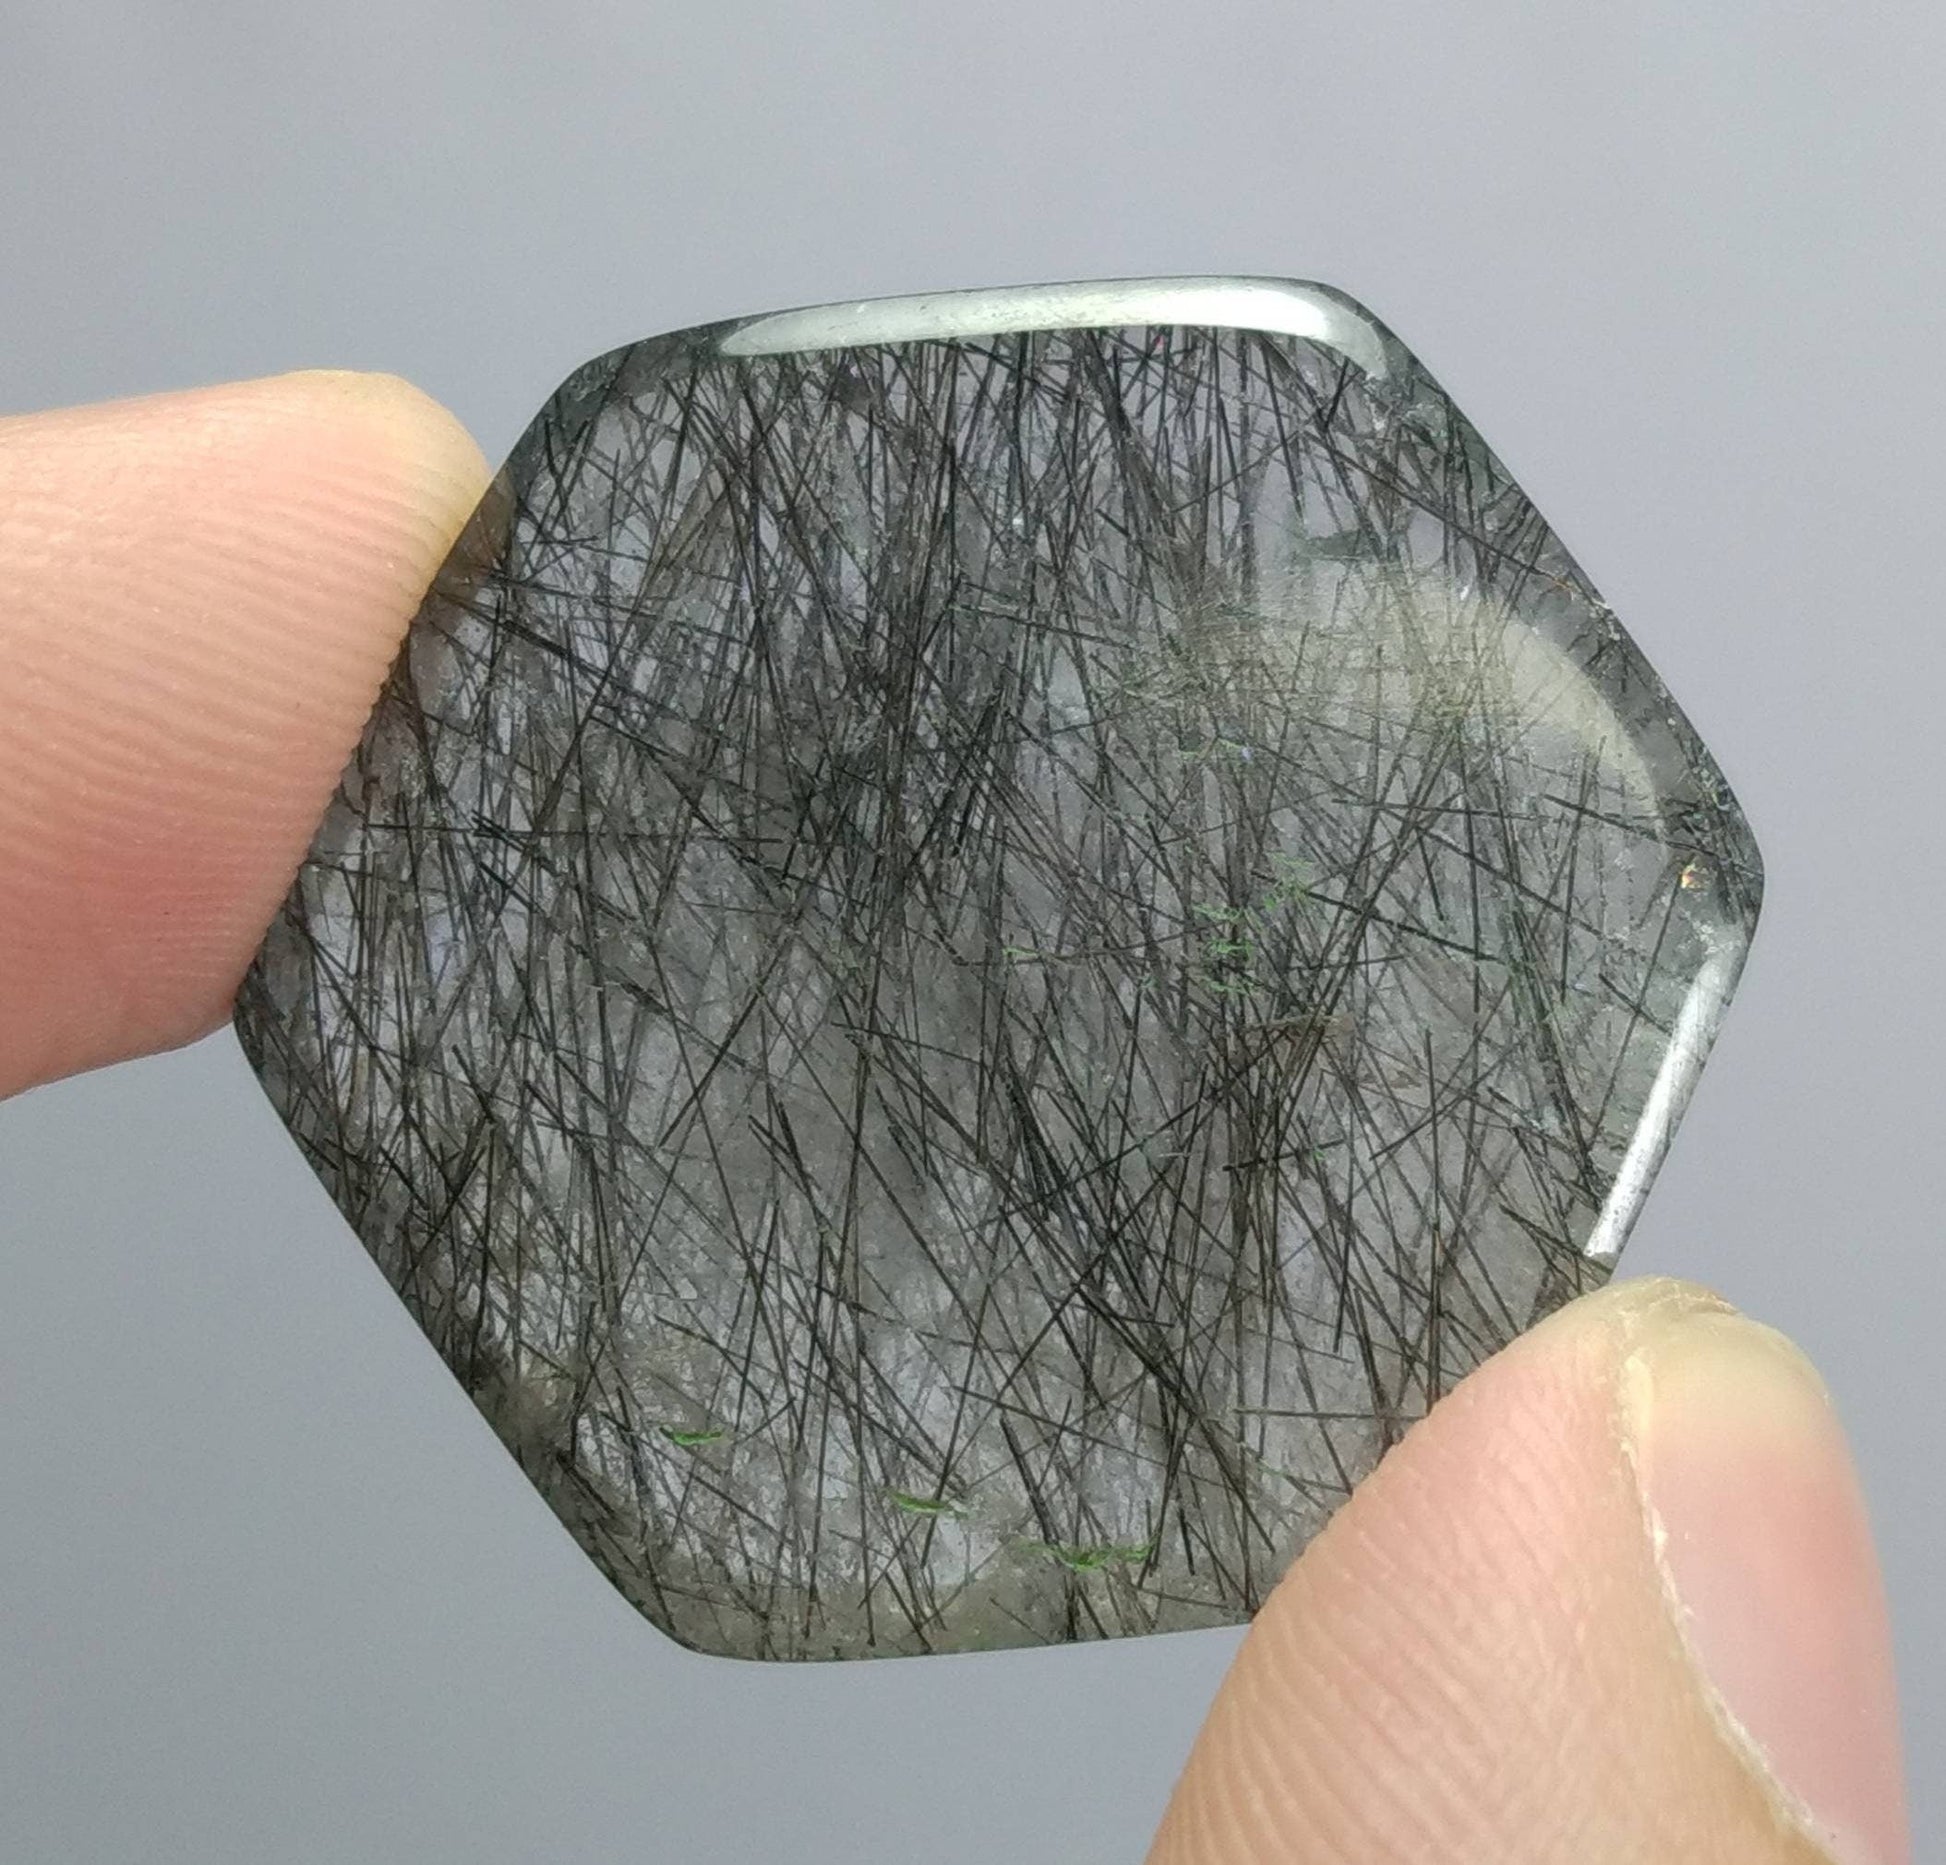 ARSAA GEMS AND MINERALSNatural fine quality beautiful 55.5 carats hexagonal shape black Tourmaline included Quartz Cabochon - Premium  from ARSAA GEMS AND MINERALS - Just $25.00! Shop now at ARSAA GEMS AND MINERALS